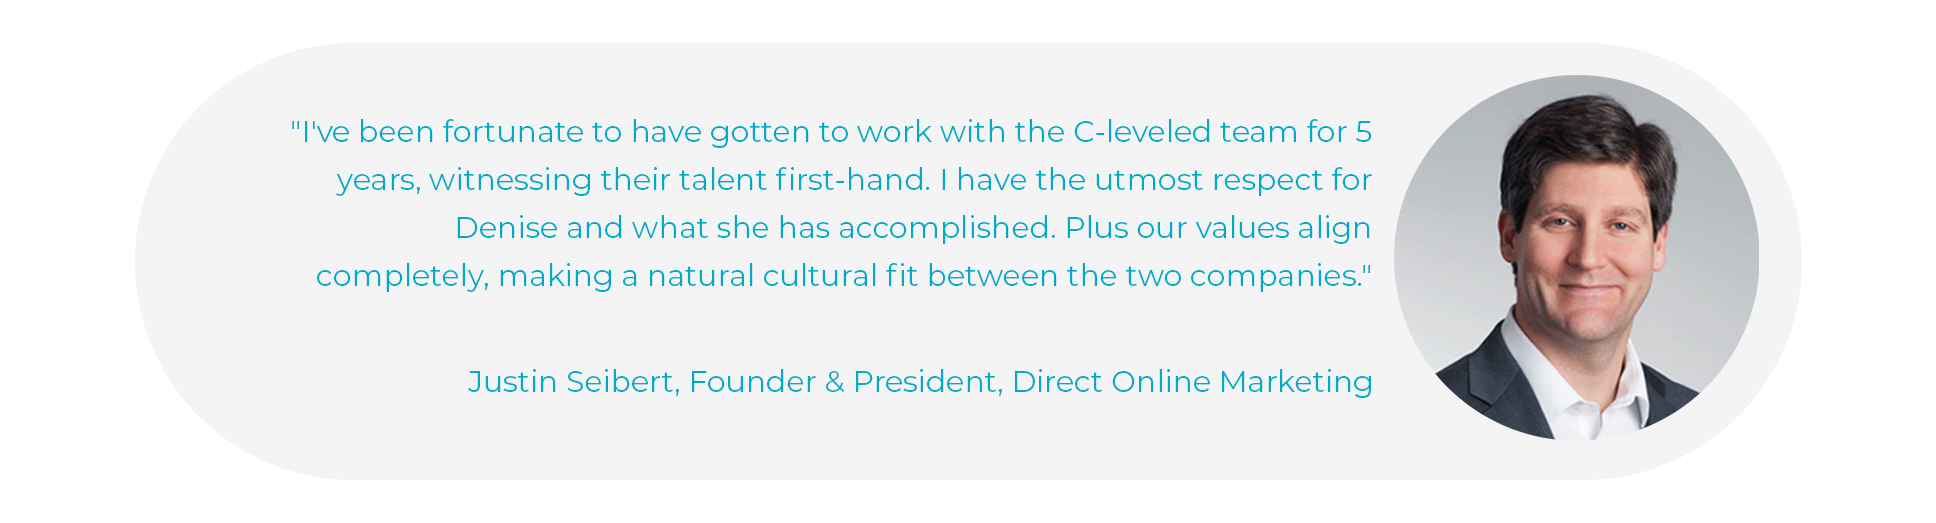 "I've been fortunate to have gotten to work with the C-leveled team for 5 years, witnessing their talent first-hand. I have the utmost respect for Denise and what she has accomplished," said Justin Seibert, Founder and President of Direct Online Marketing. "Plus our values align completely, making a natural cultural fit between the two companies."